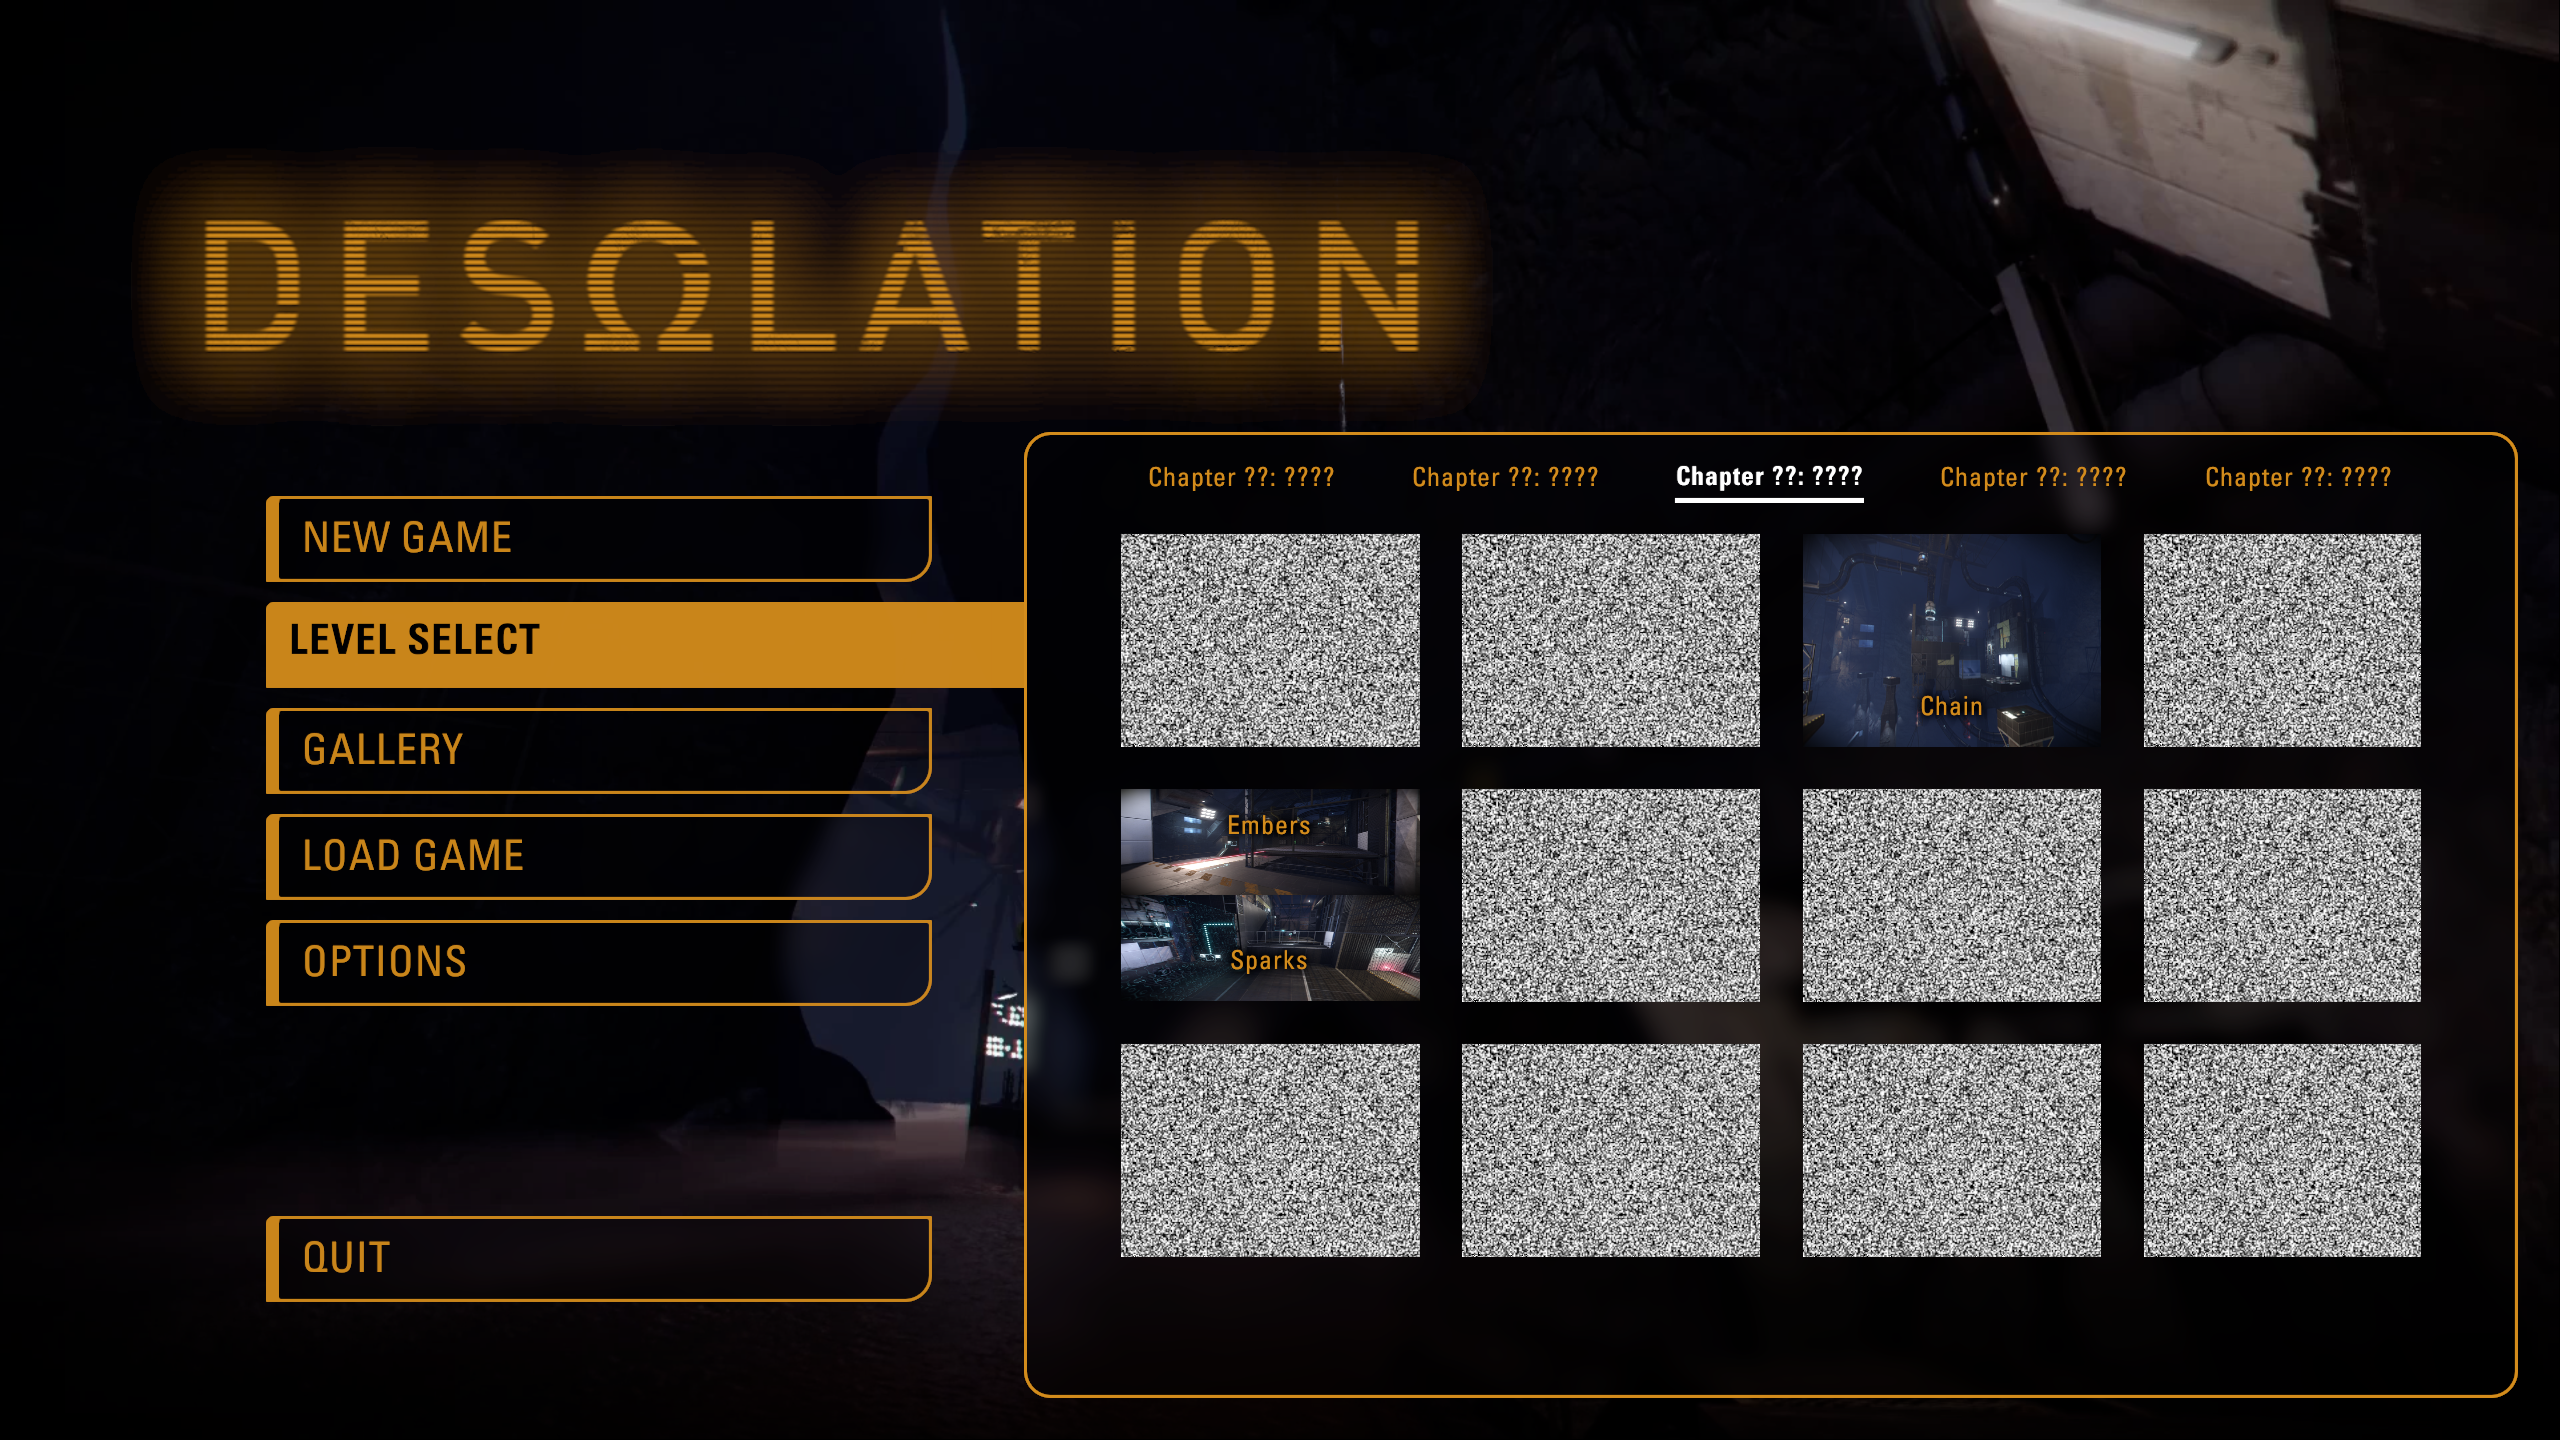 The Level Select screen on the main menu of Desolation, showing unlocked levels with locked levels hidden.